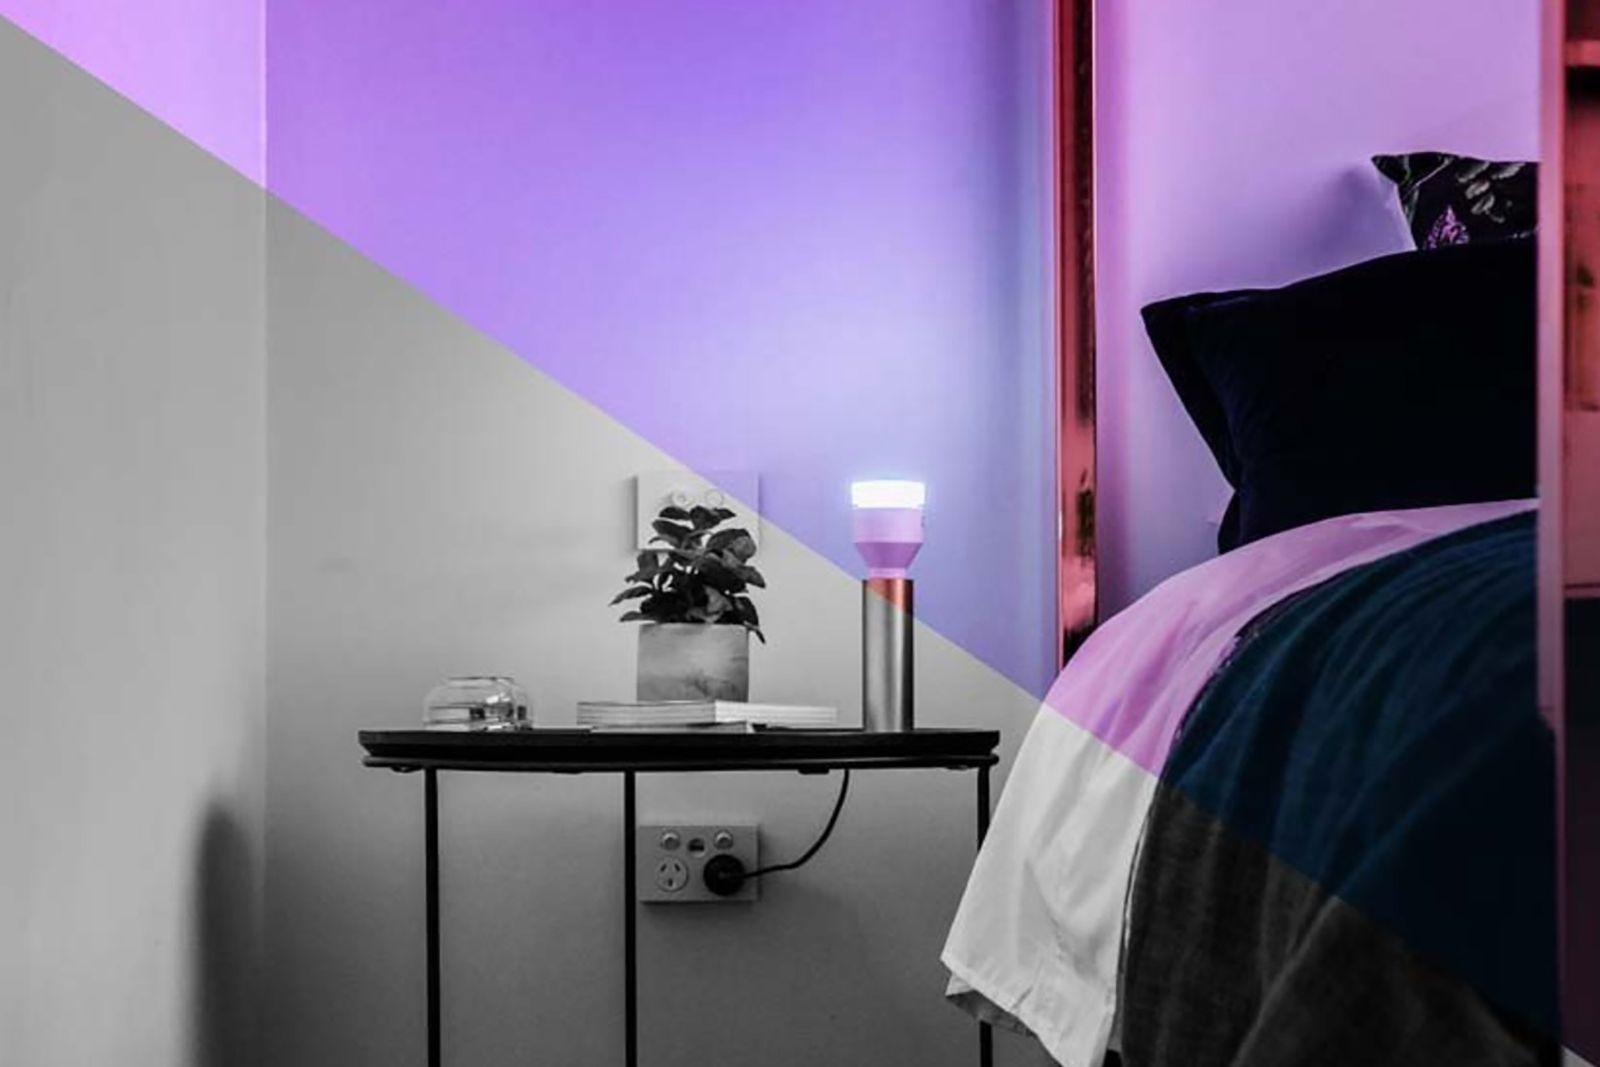 Get started with smart lighting - Lifx gear is up to 35 percent off image 1